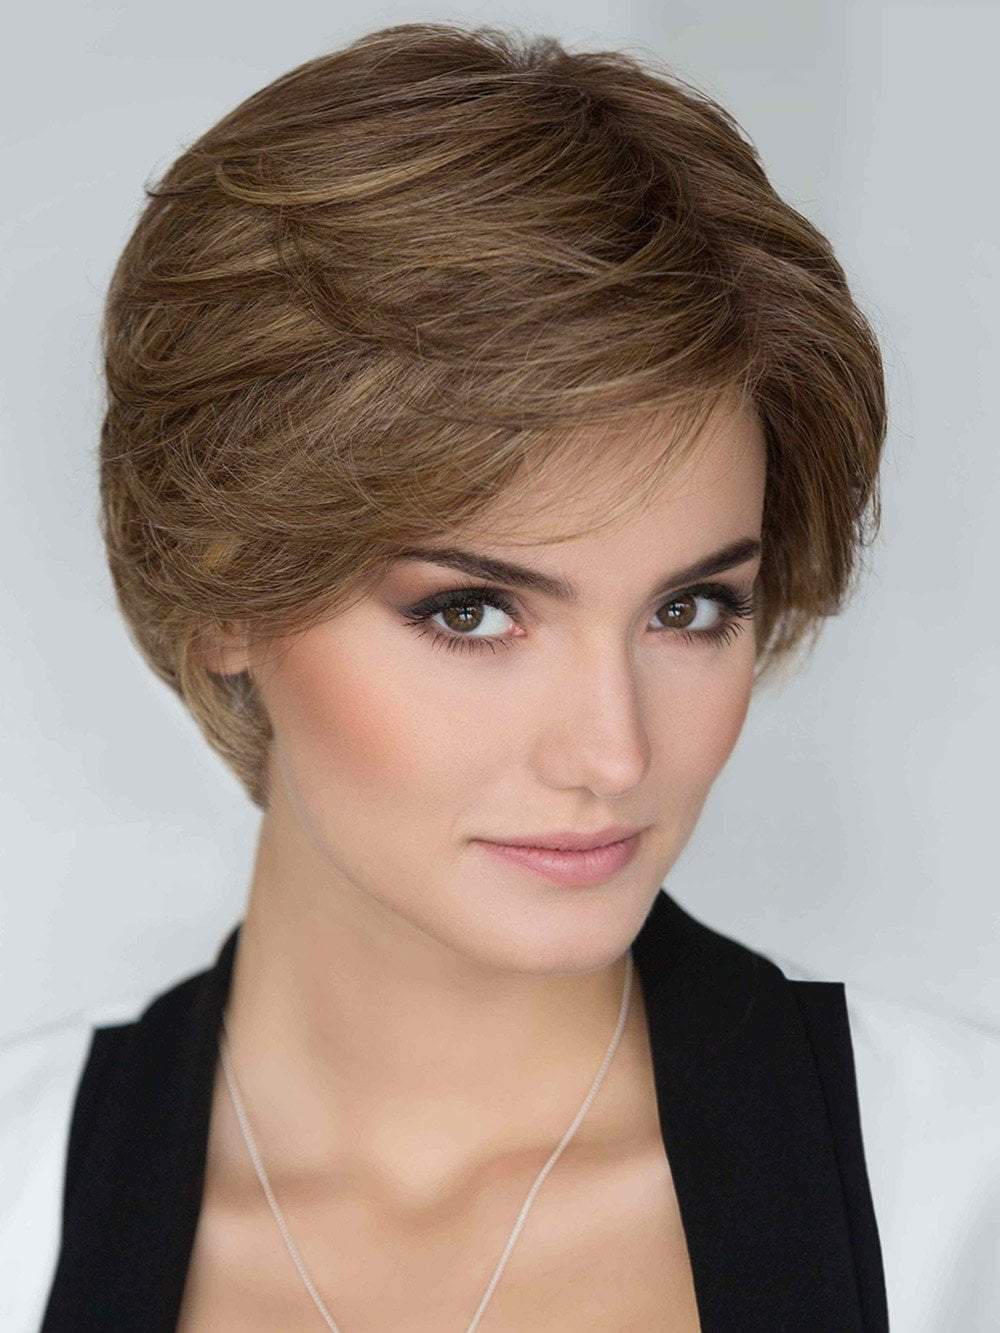 This perfectly designed short wig is full and can be styled straight or curly as it is made with Ellen Wille's innovative Prime Hair Blend